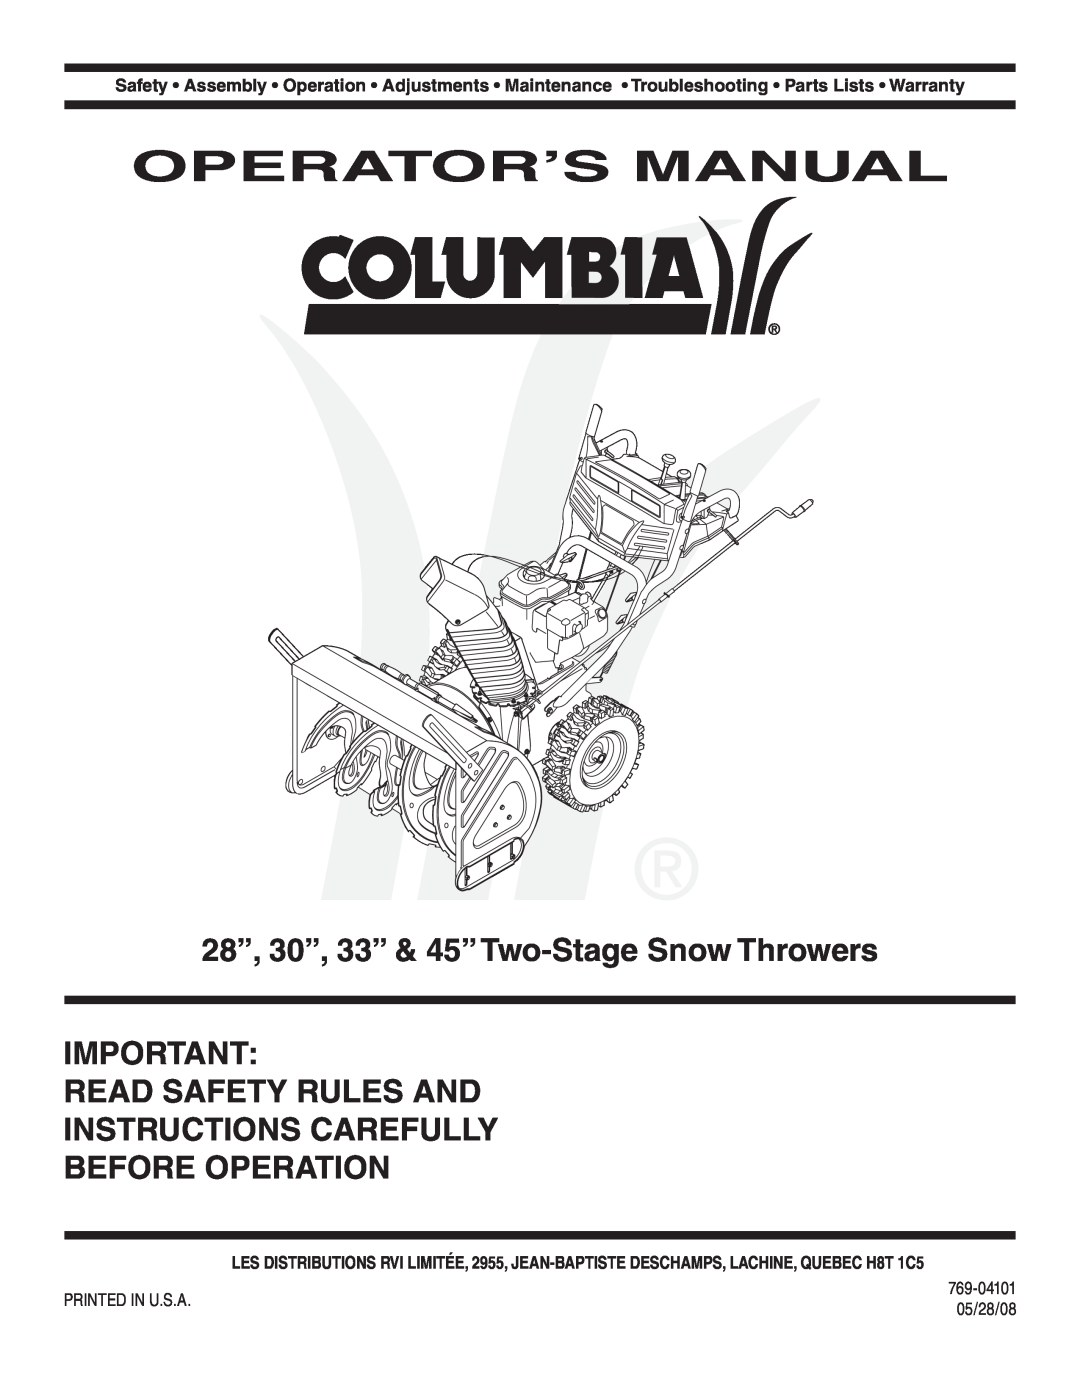 MTD 769-04101 warranty Operator’S Manual, 28”, 30”, 33” & 45”Two-Stage Snow Throwers, Printed In U.S.A, 05/28/08 